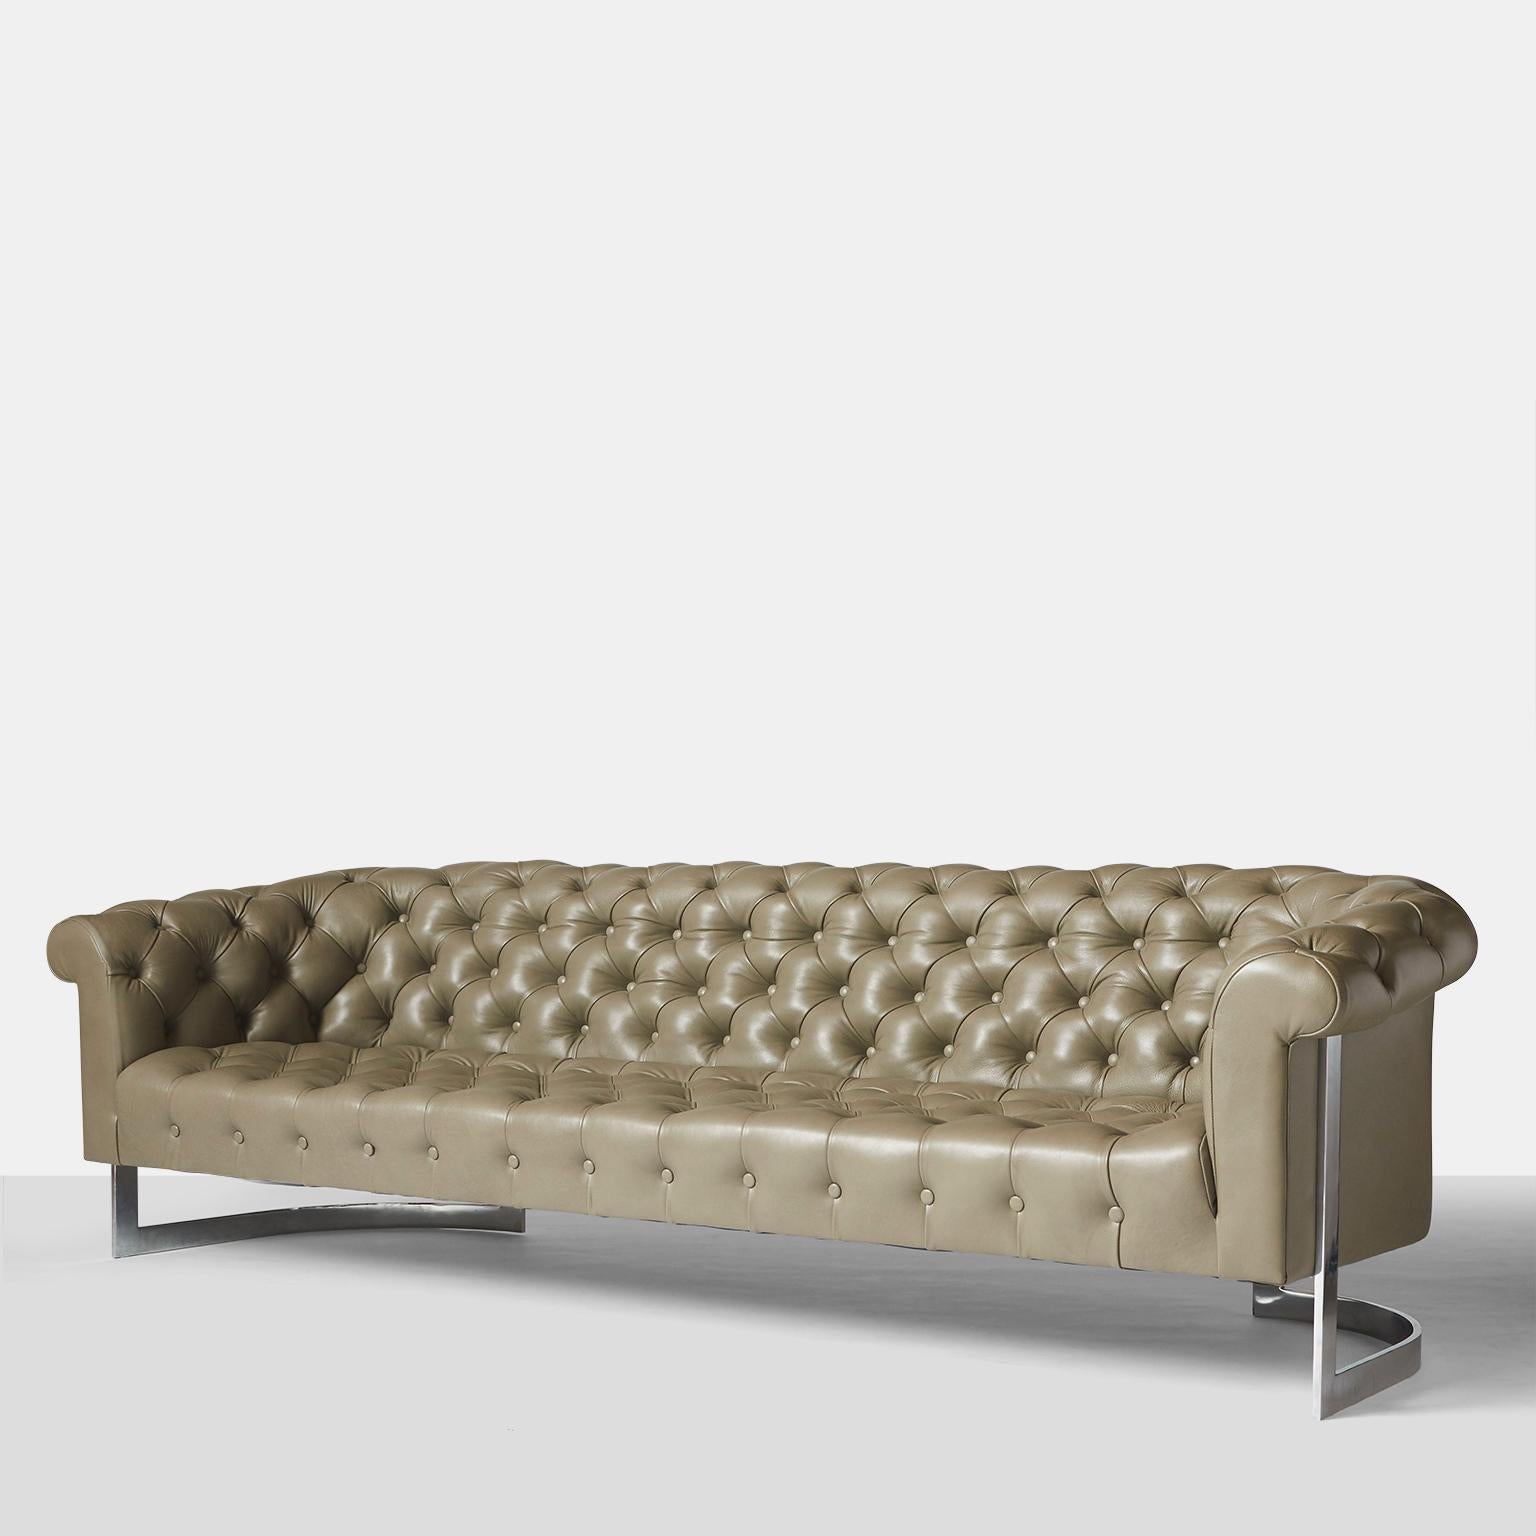 A Chesterfield sofa for Thayer Coggin circa early 1970s. Elegant, diamond tufted stone gray leather. Wrap around chrome plated steel back.
Excellent restored condition.